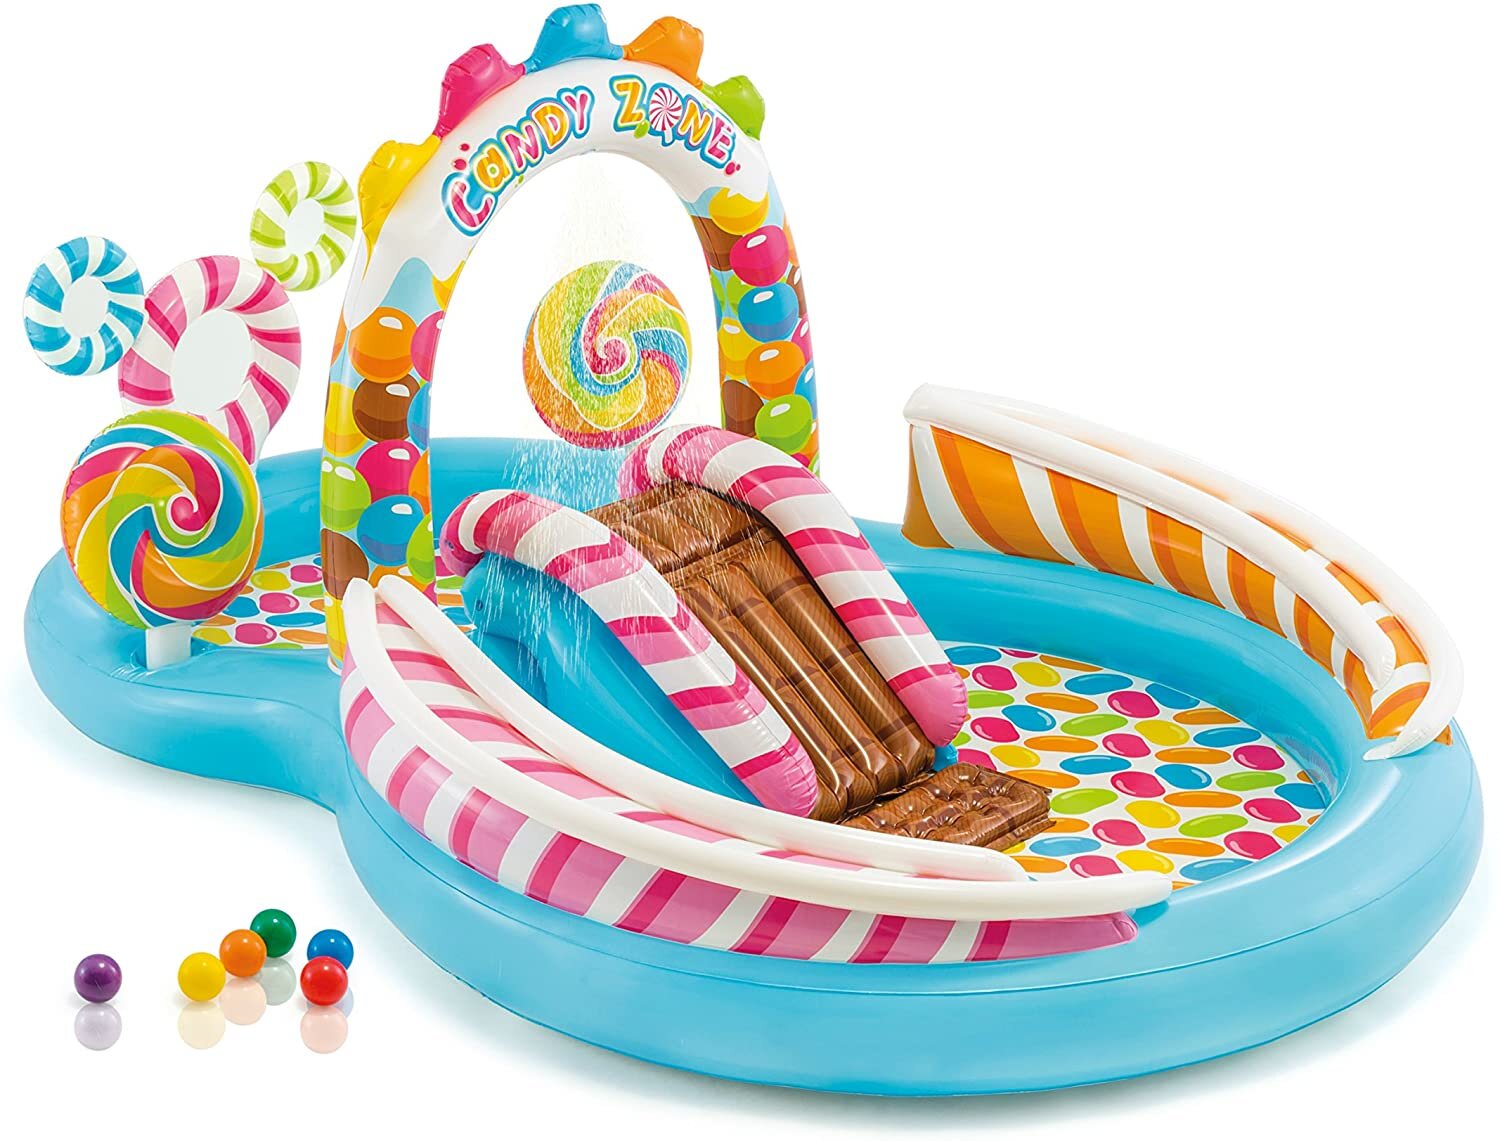  Water Play at Home on Hello Rascal Kids. Candy Land water slide.  